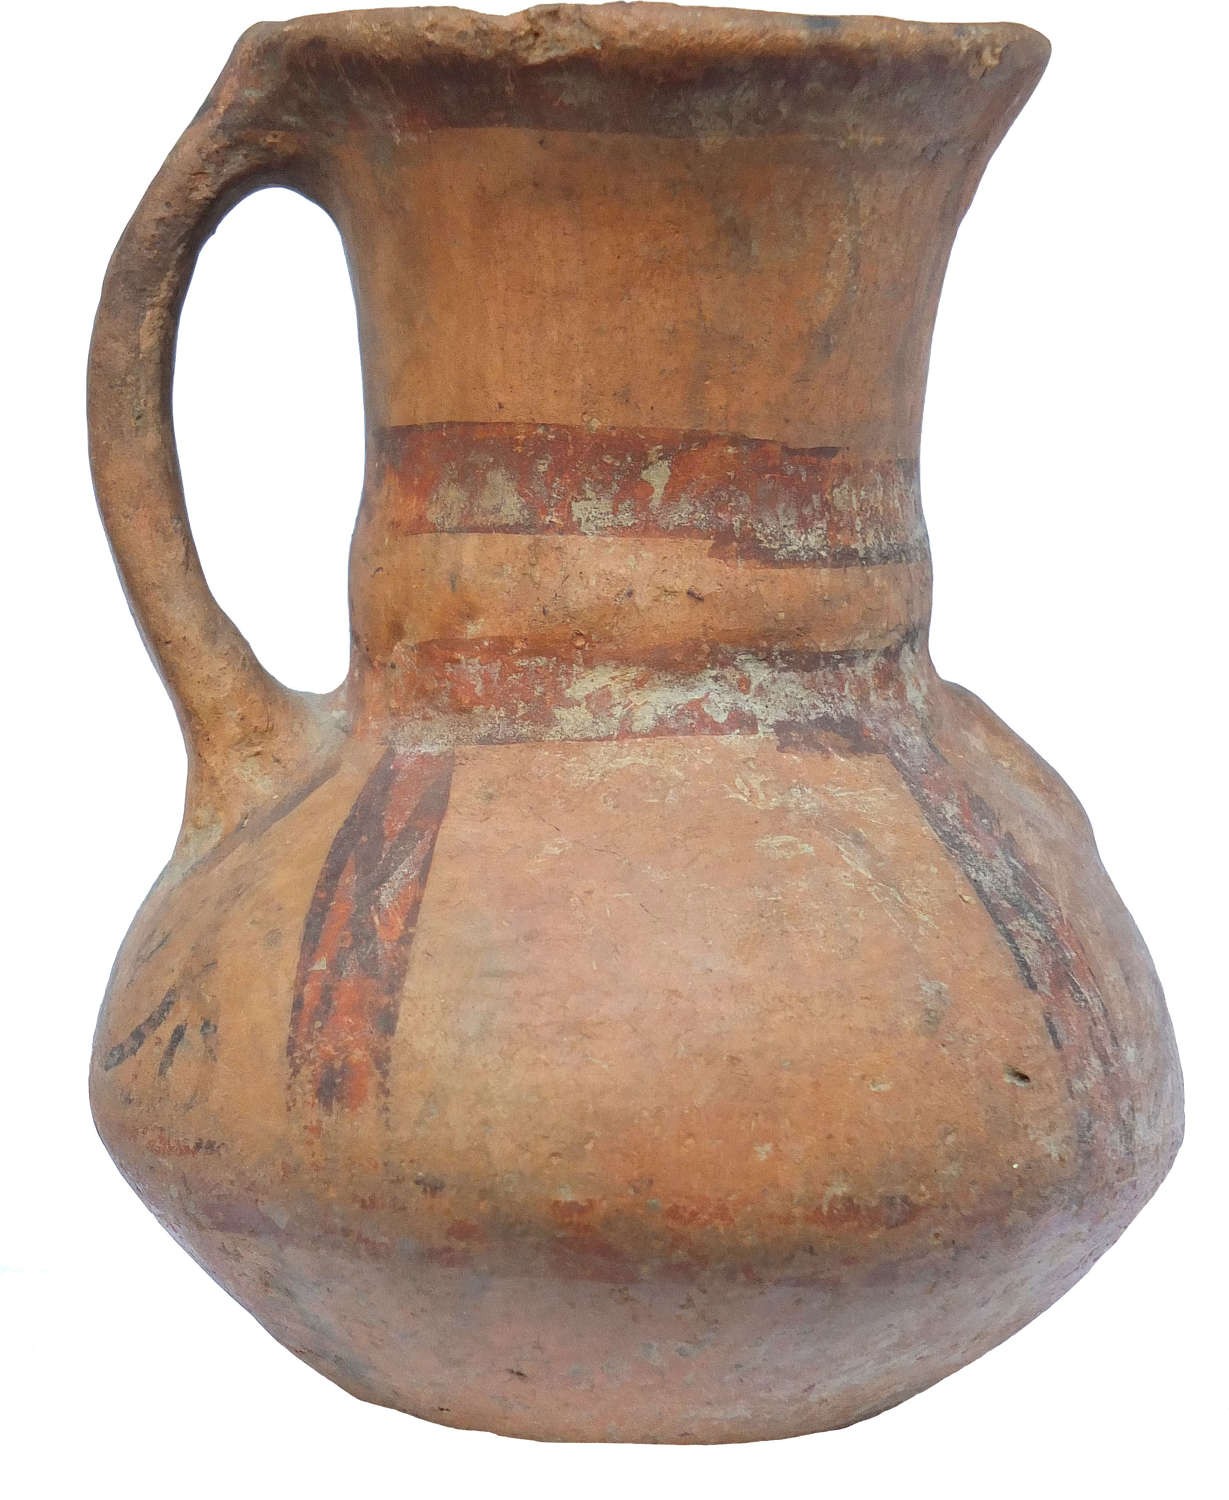 A pottery twin-handled amphora in debased Tiahuanaco style